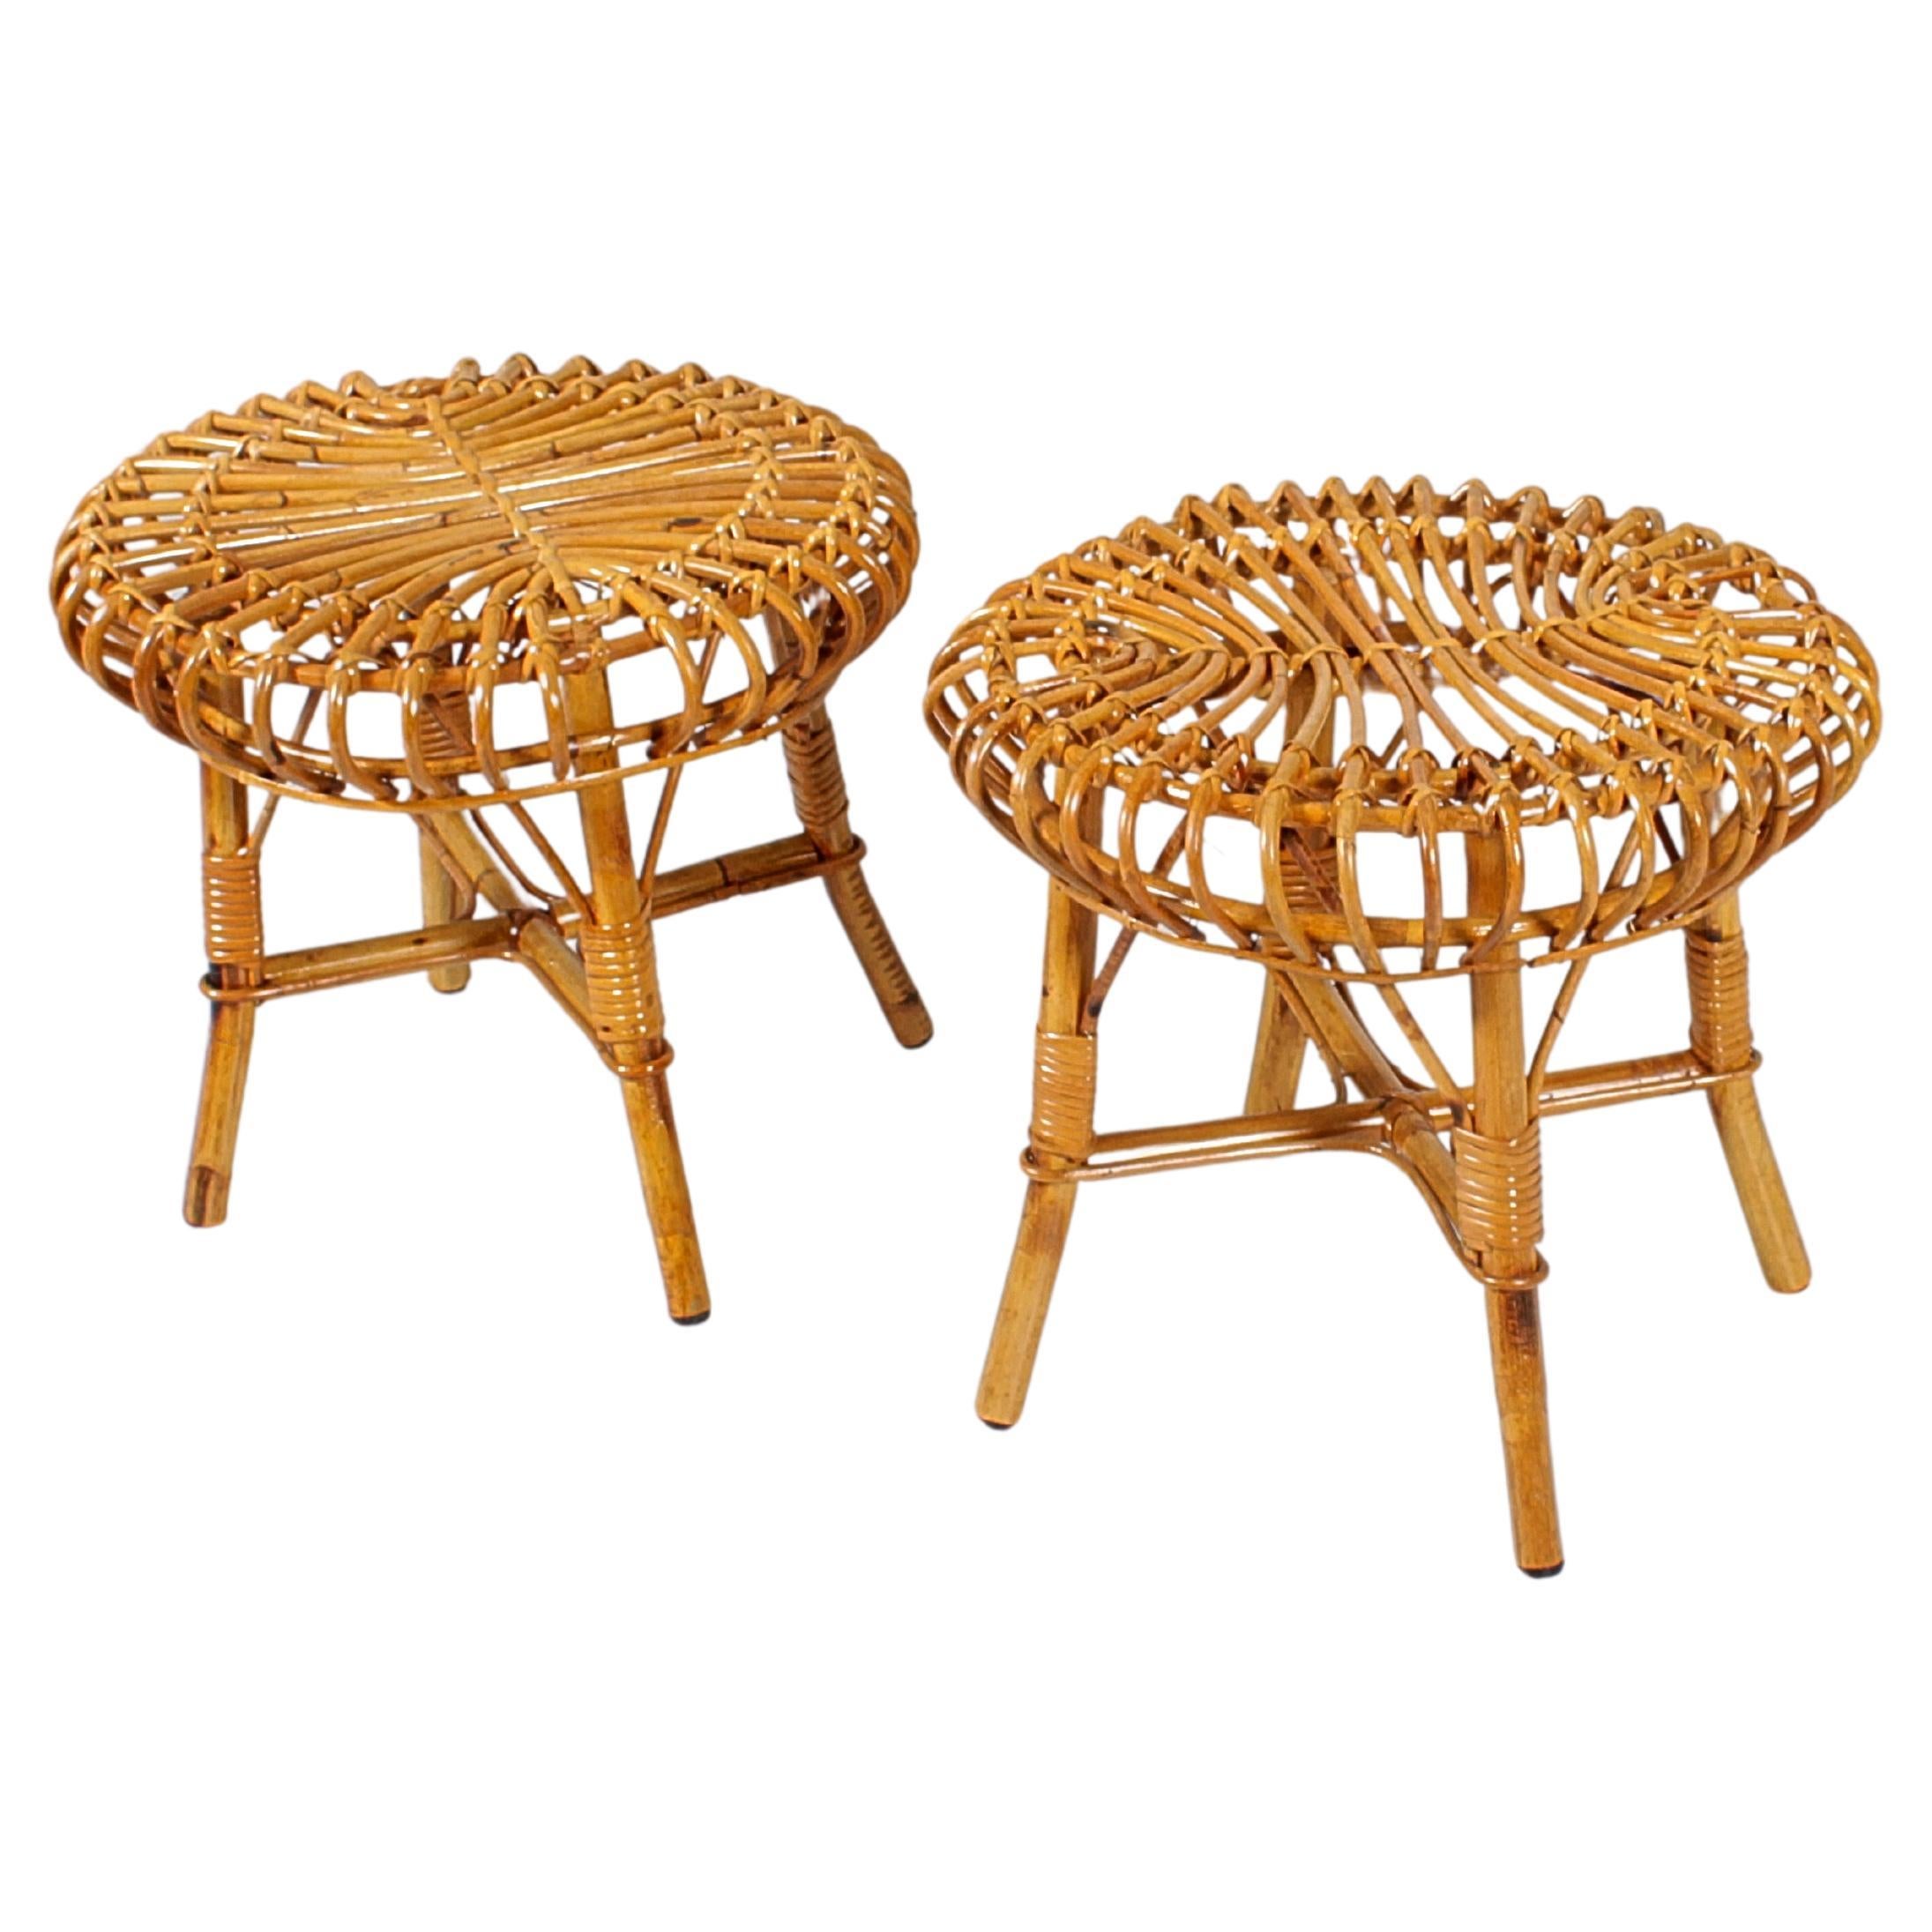 F. Albini for Bonacina Set of 2 Rattan, Bamboo and Wicker Stools 60s Italy For Sale